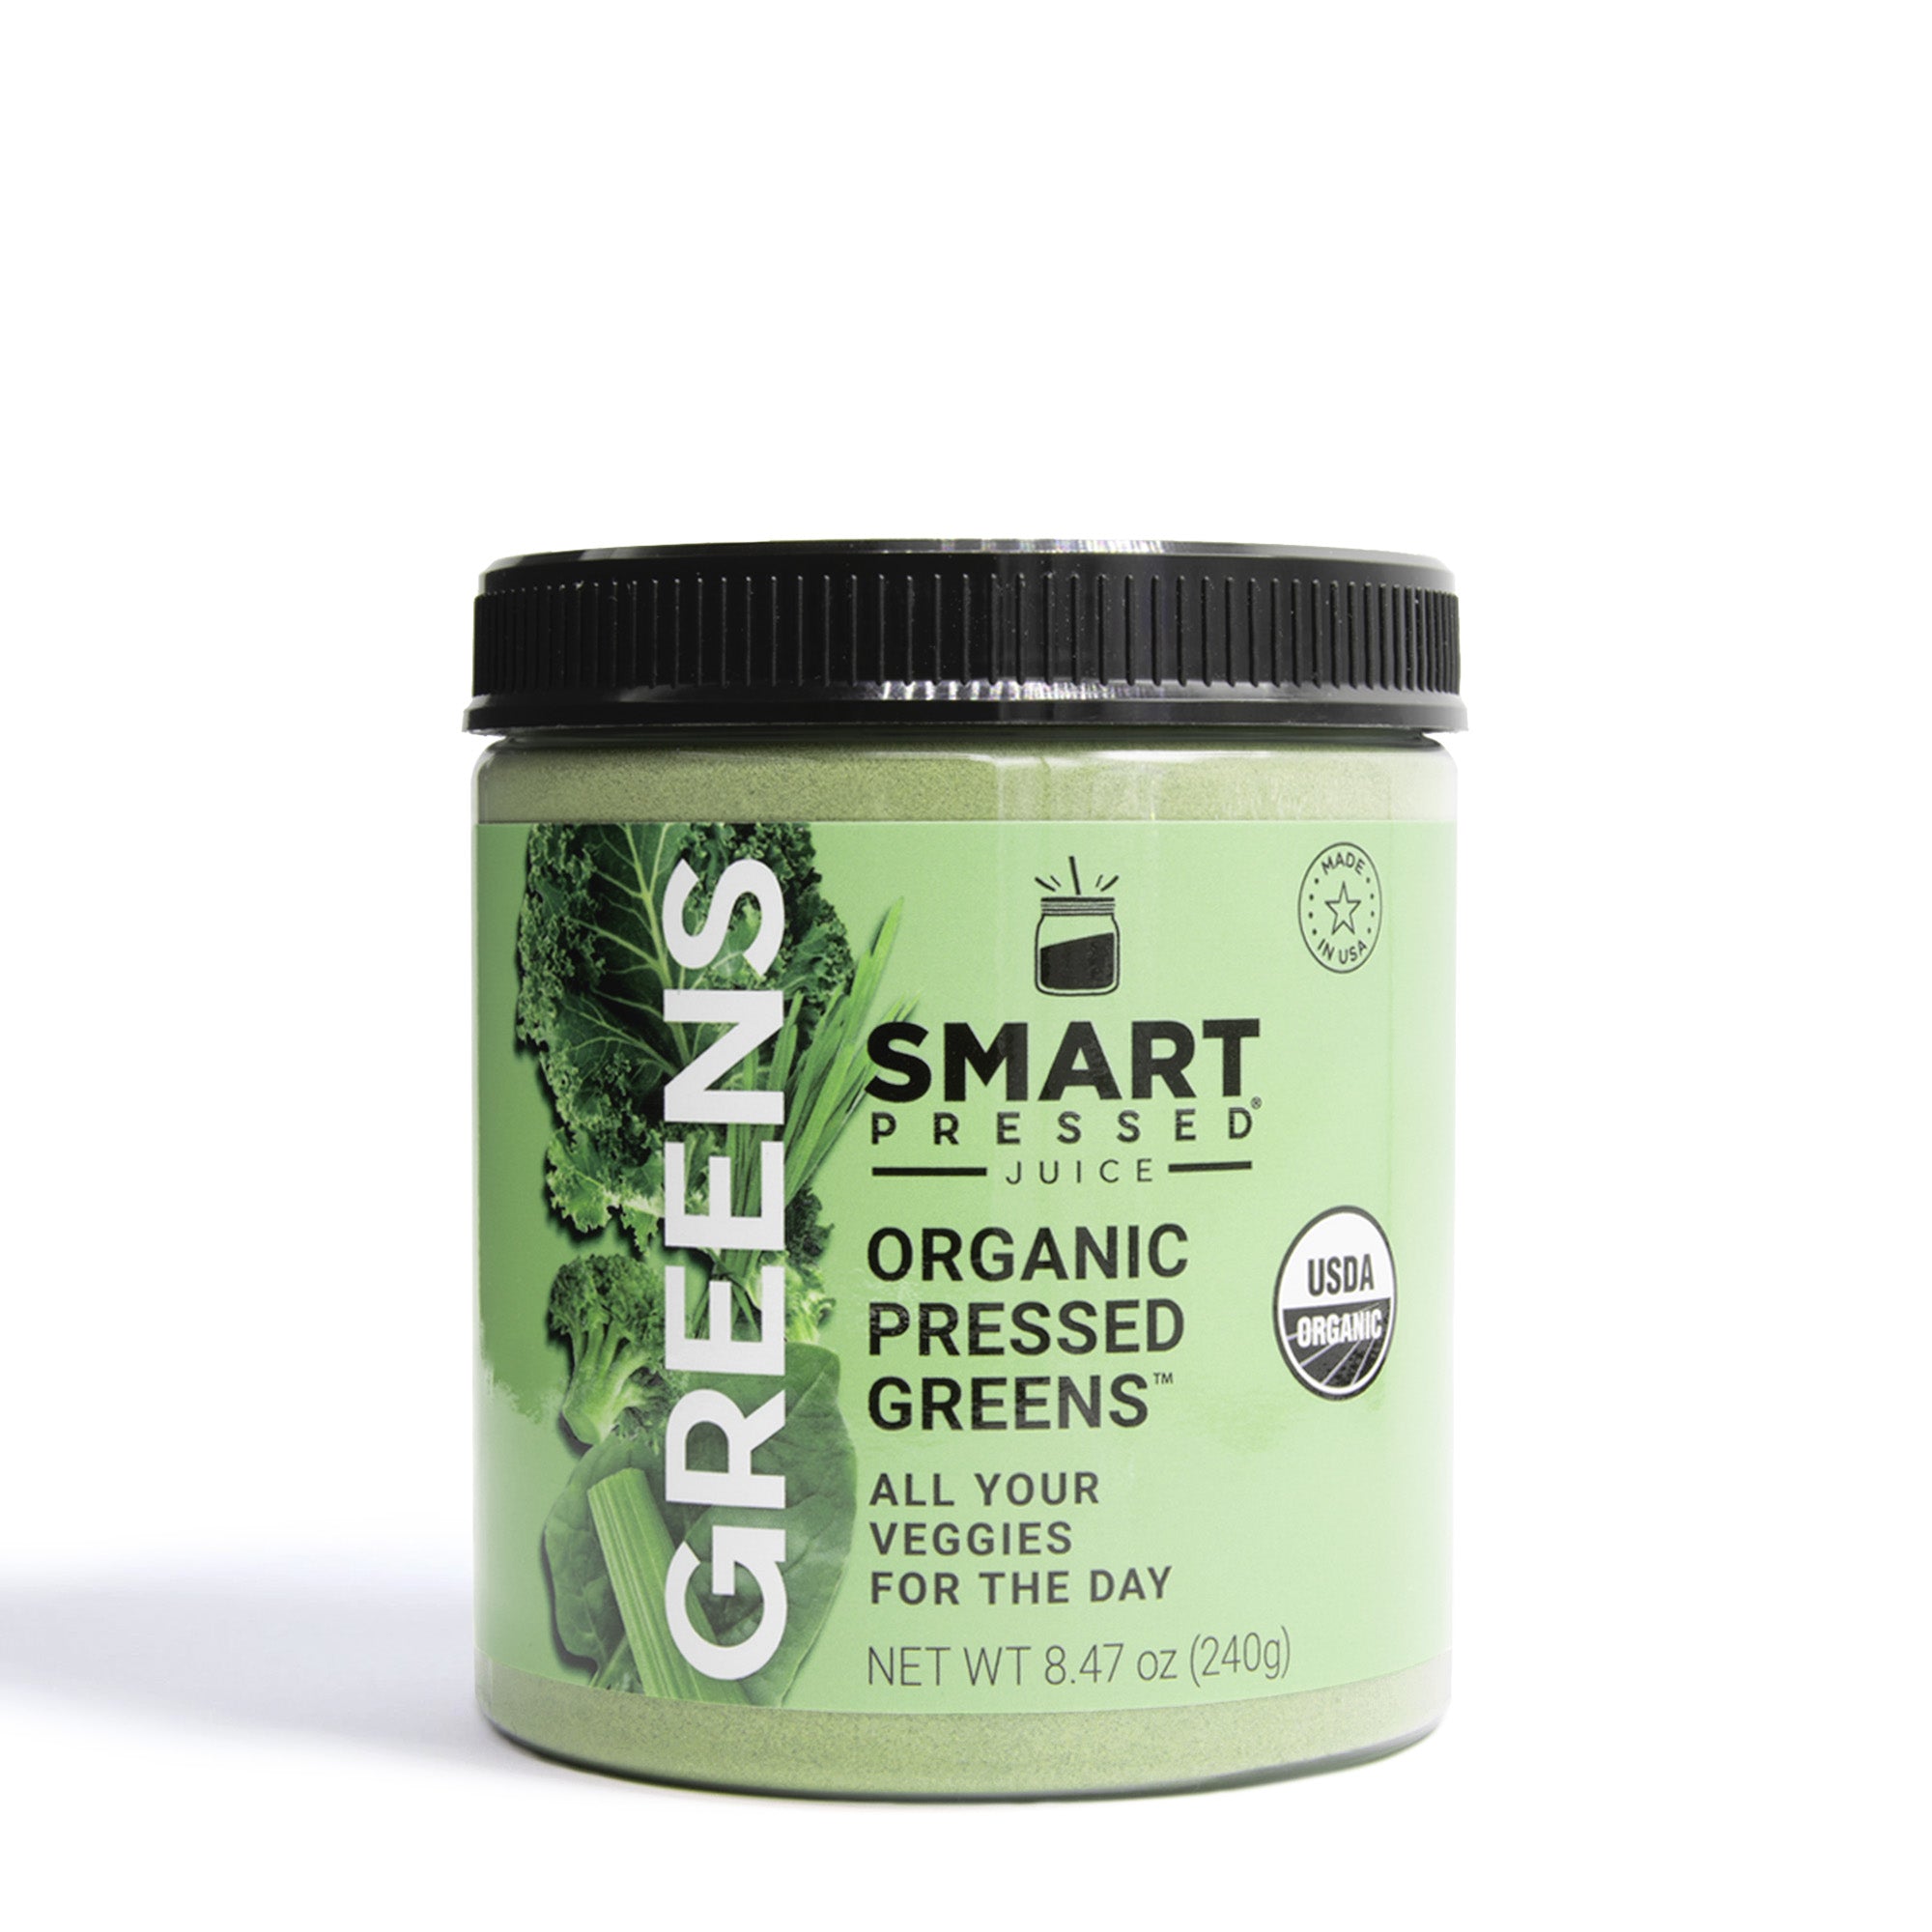 one jar of 240 grams Organic Pressed Greens against a white background.